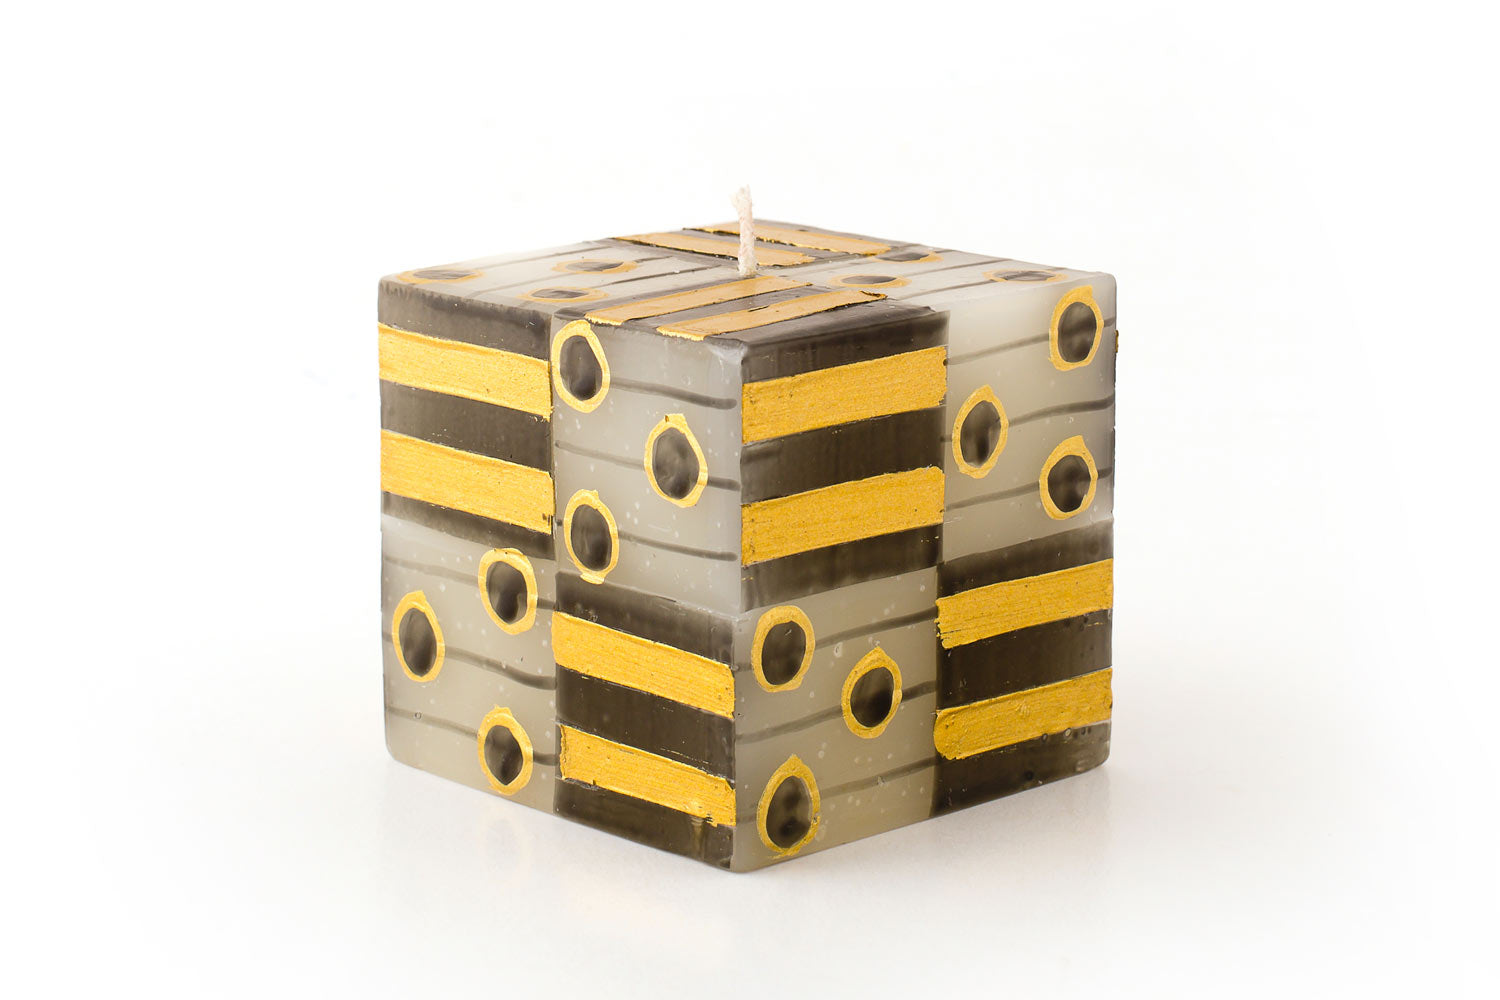 Celebration 3"x3"x3" cube candle.  Hand painted on white candle, gold & grey/black stripes & dots. Fair Trade.